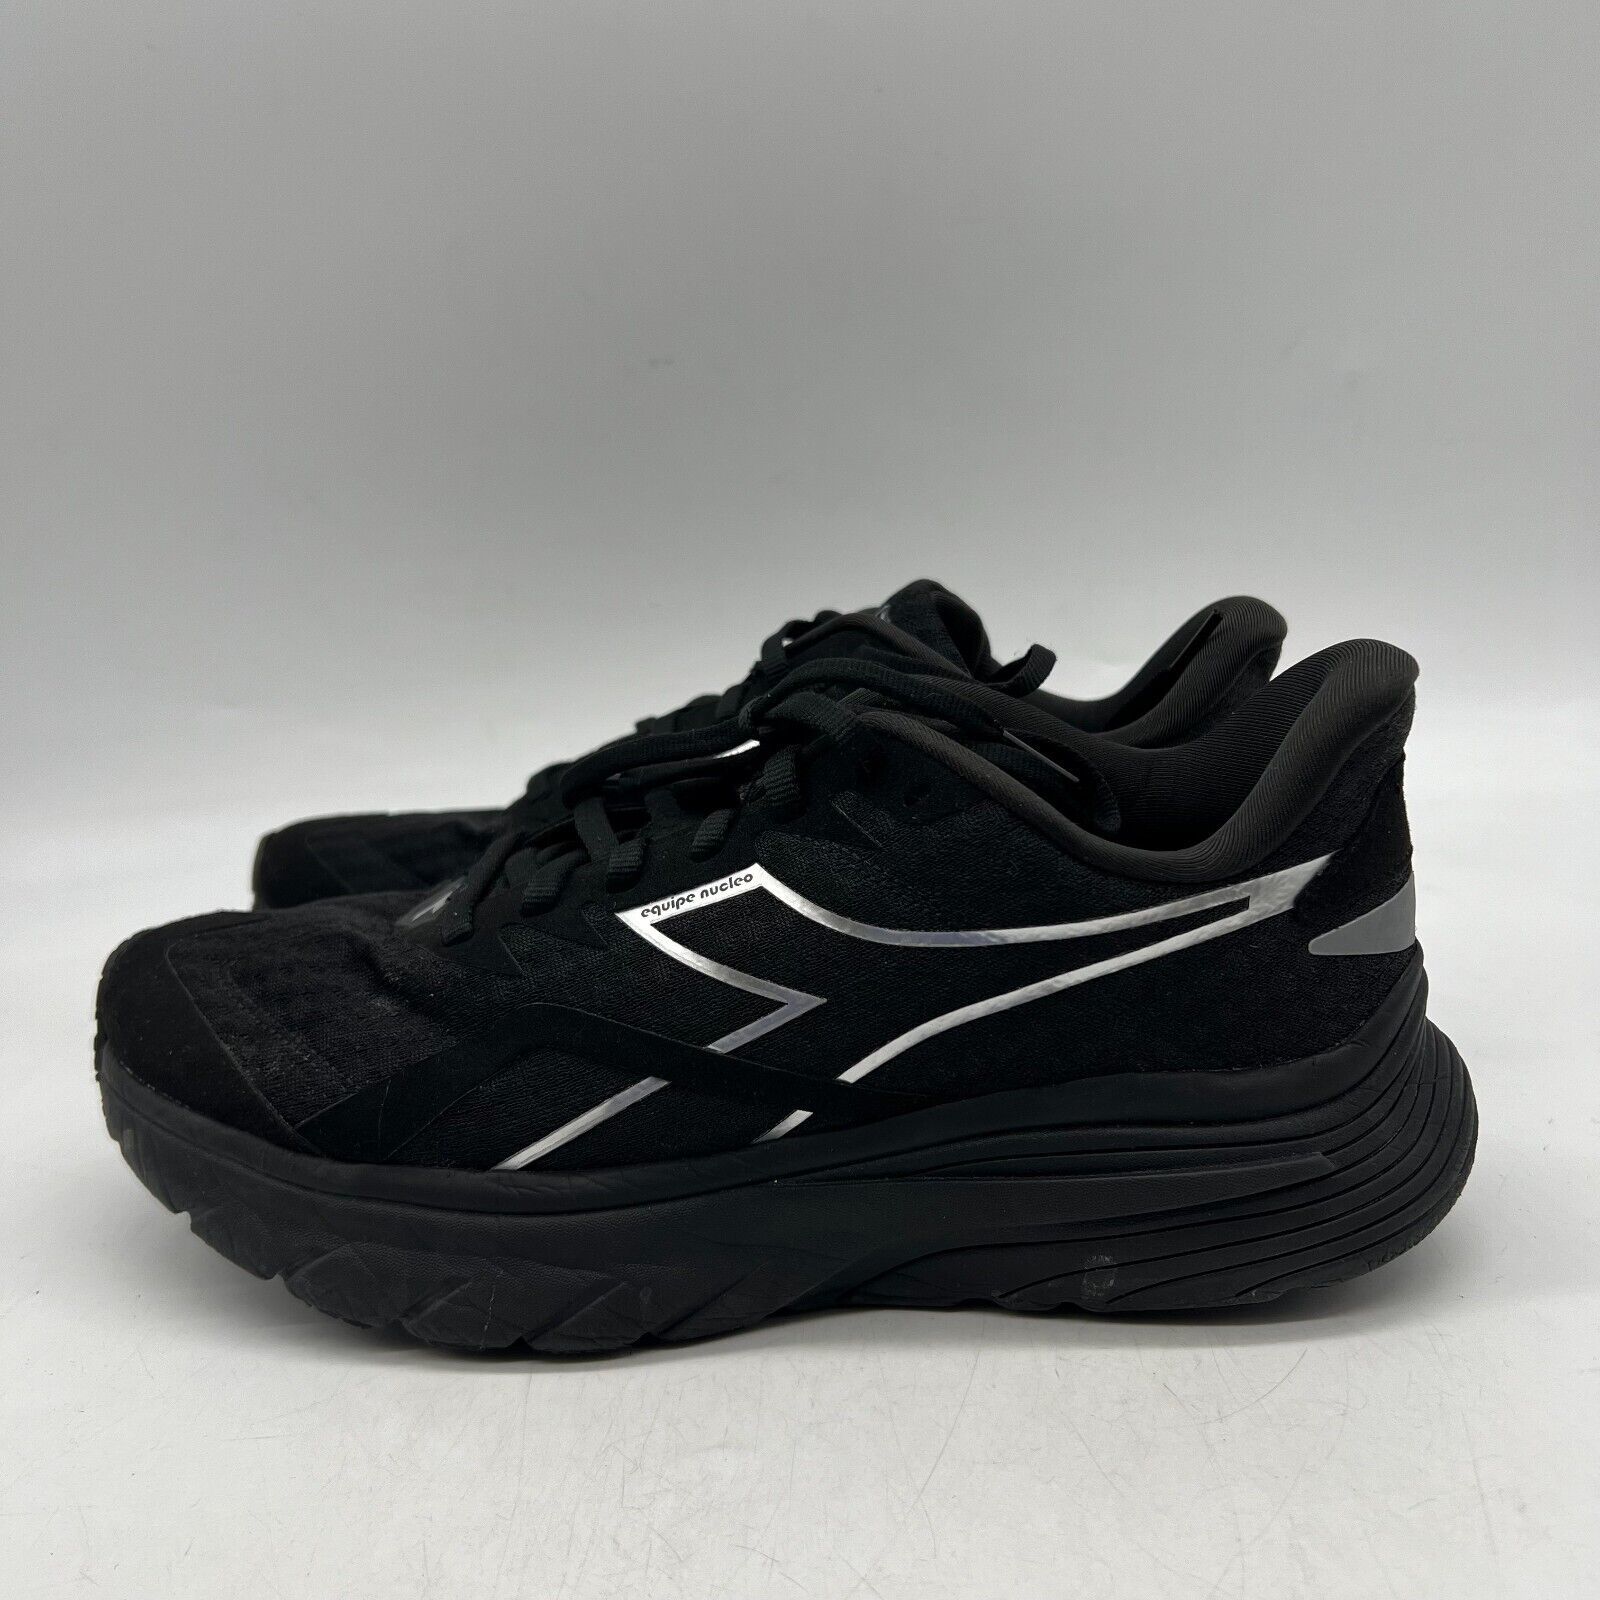 Primary image for Diadora Equipe Nucleo 101.179095 Womens Black Lace Up Running Shoes Size 10